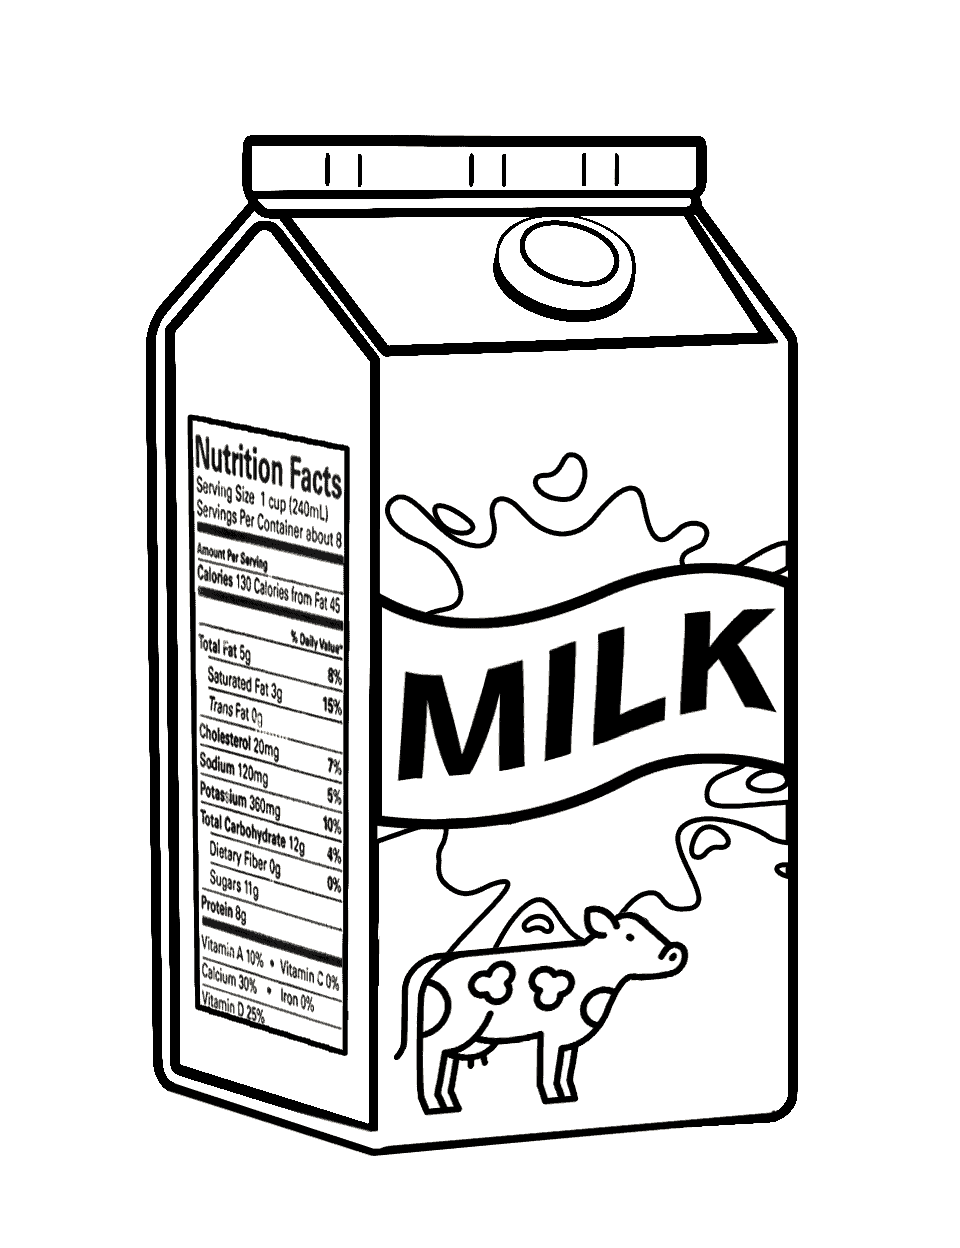 Nutrition Label Food Coloring Page - A milk carton with a nutrition facts label on its side.